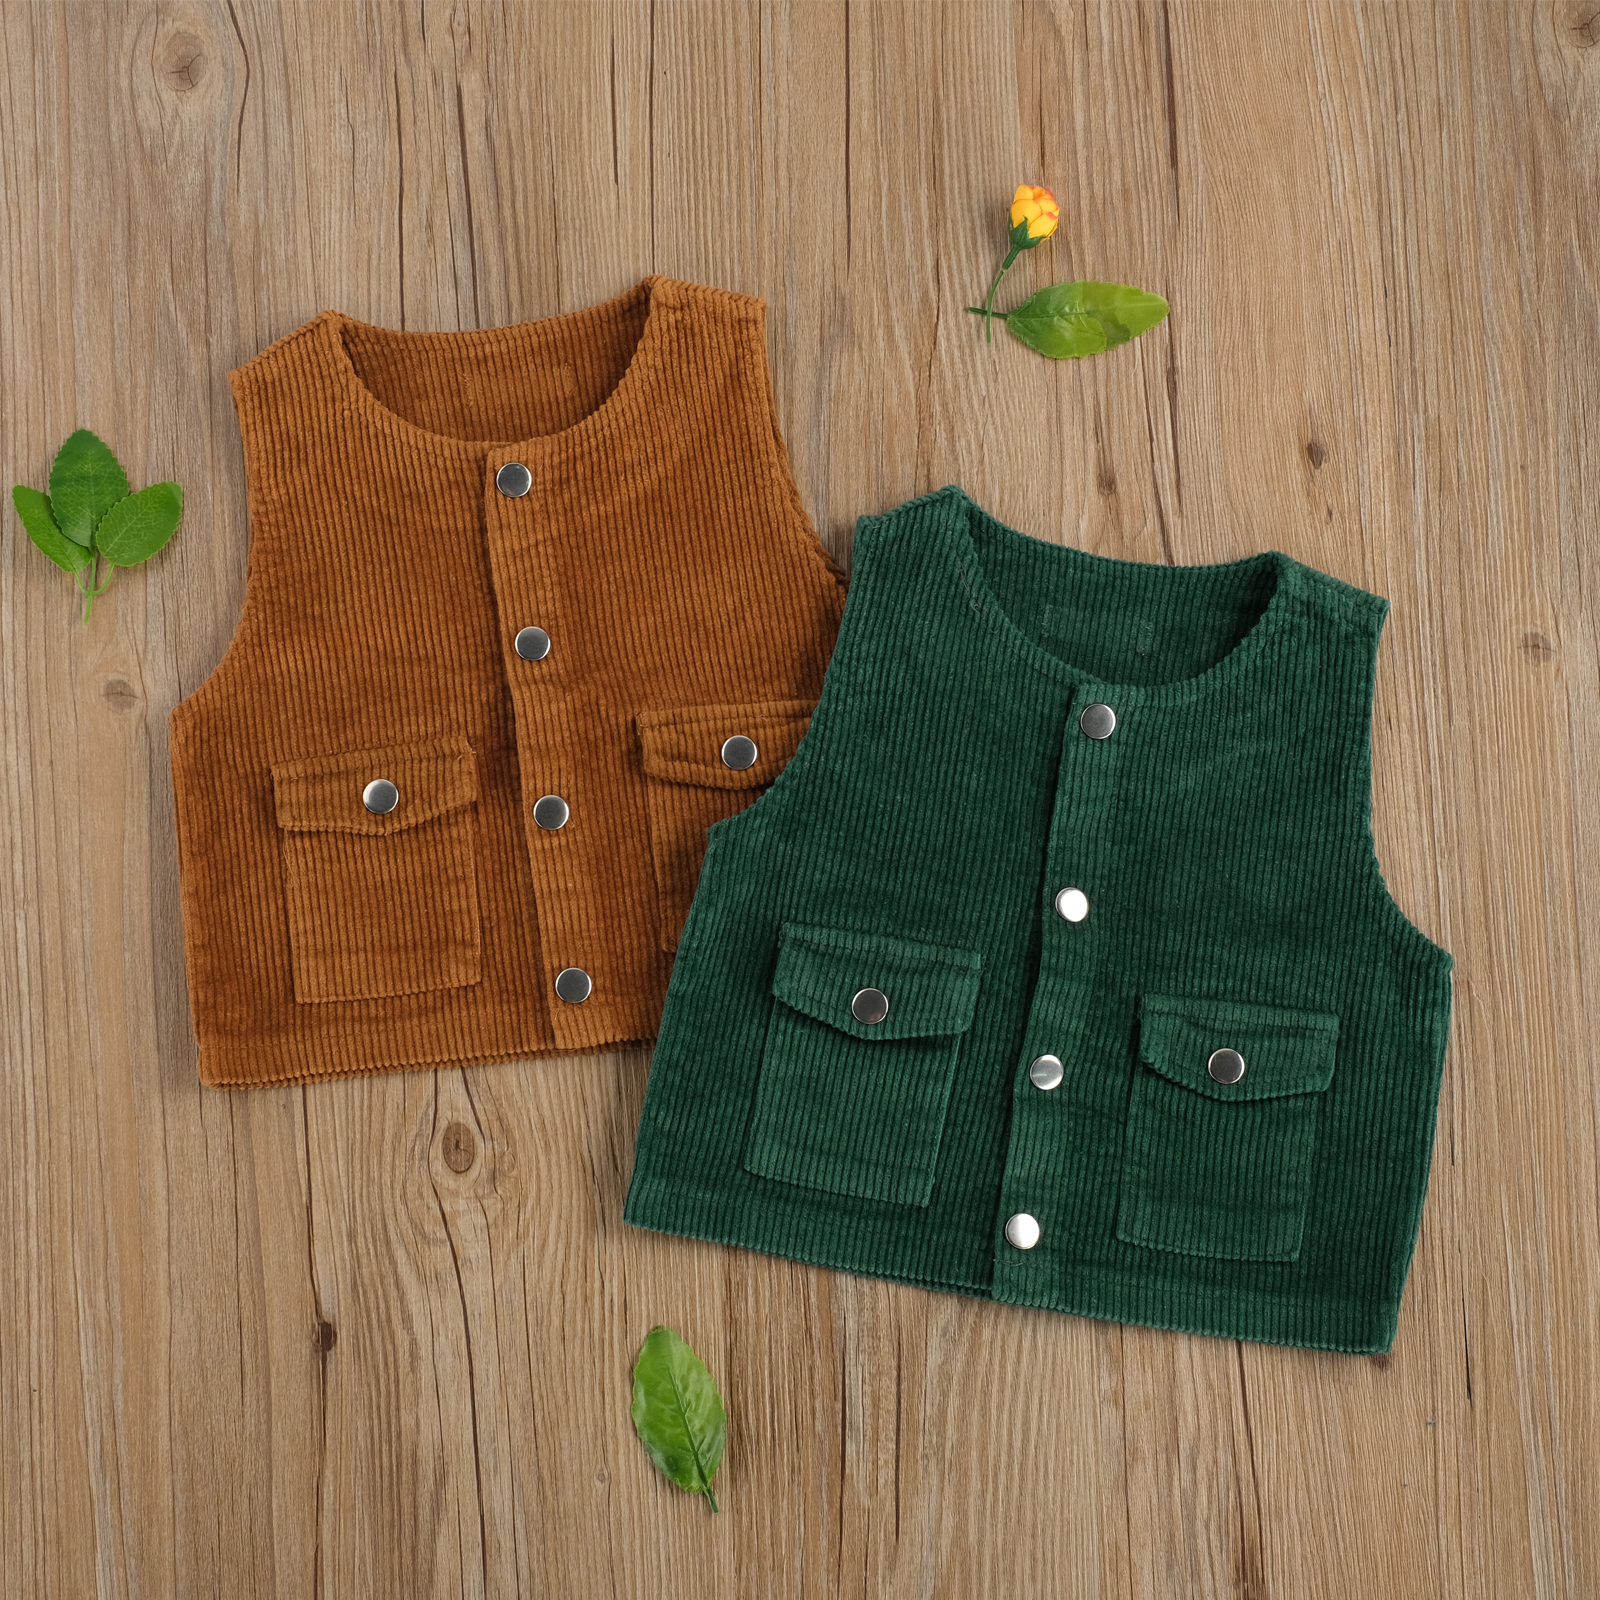 0-4Y Lovely Kids Girls Boys Vest Coat Tops Solid Sleeveless Single Breasted Pocket Waistcoats 2 Colors